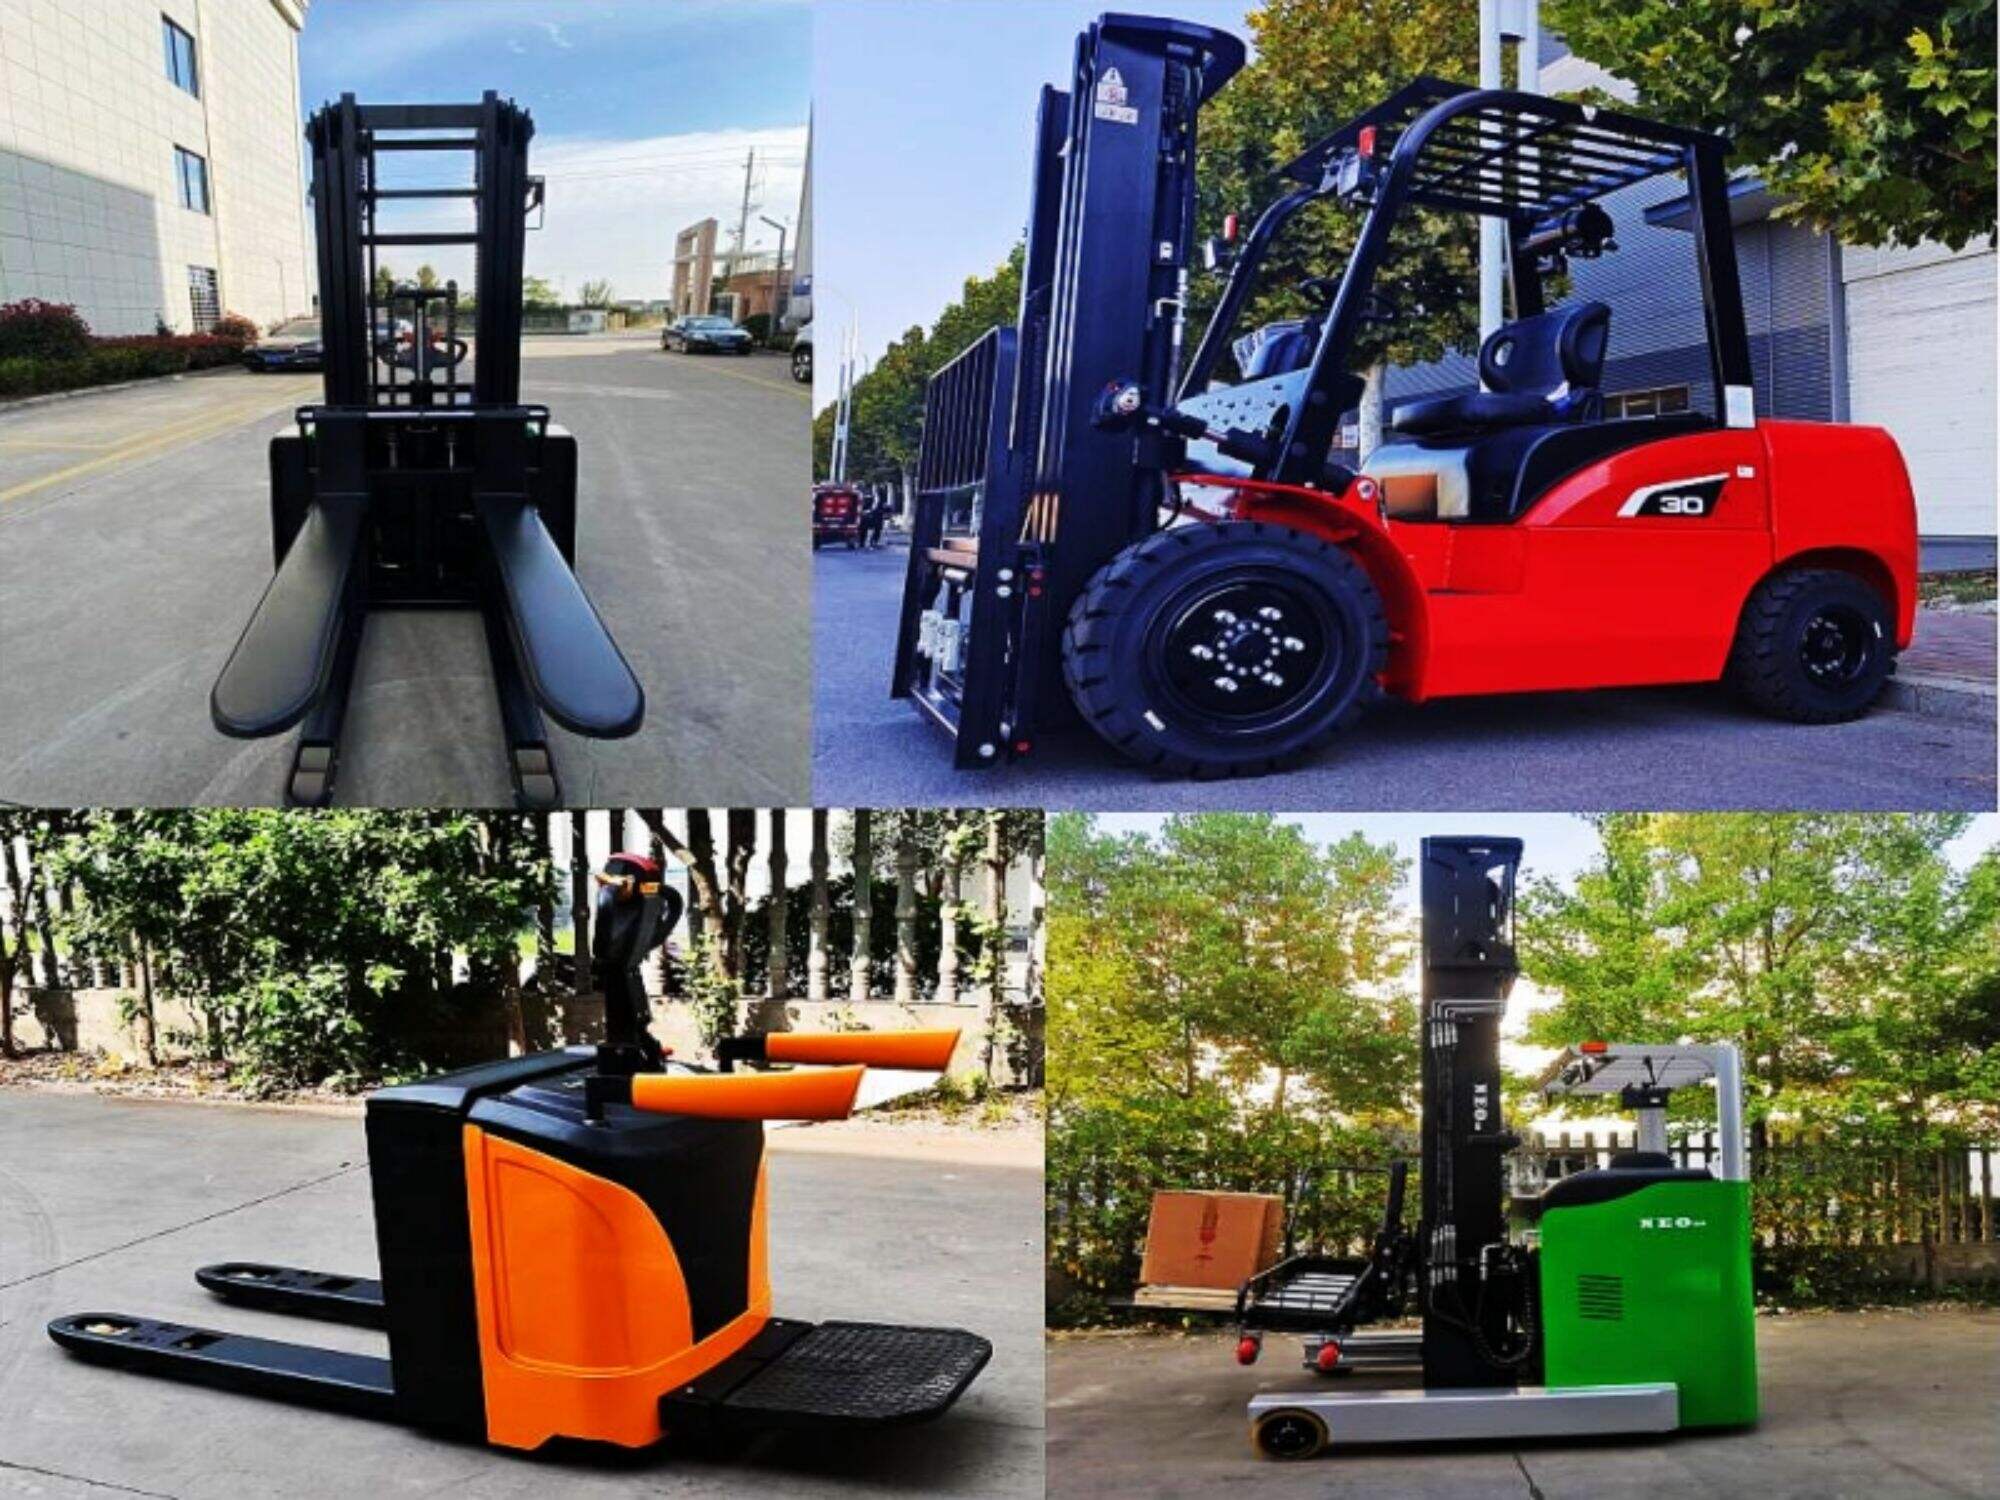 What are the classifications of industrial forklifts?